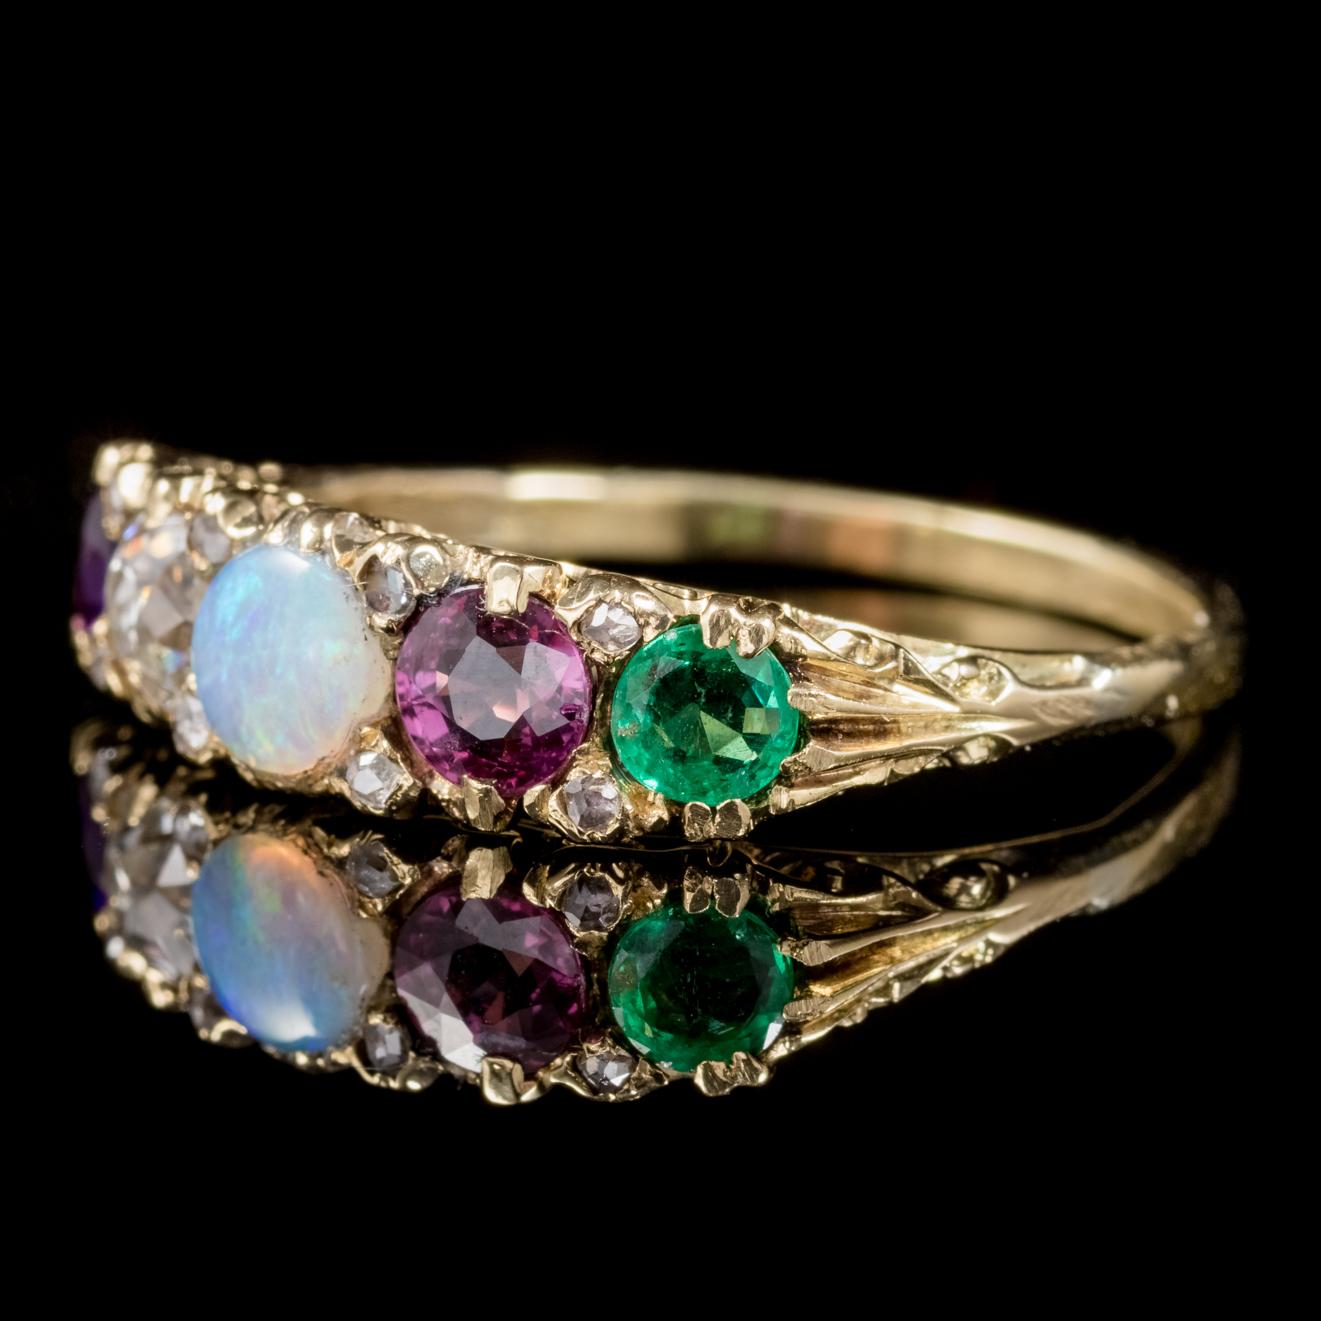 This colourful antique 18ct Gold Gemstone ring is Victorian Circa 1900.

The gemstones in the gallery spell out the word ‘ADORE’ with each first letter - Amethyst, Diamond, Opal, Ruby and Emerald.

Sentiment rings or ADORE rings were popular in the